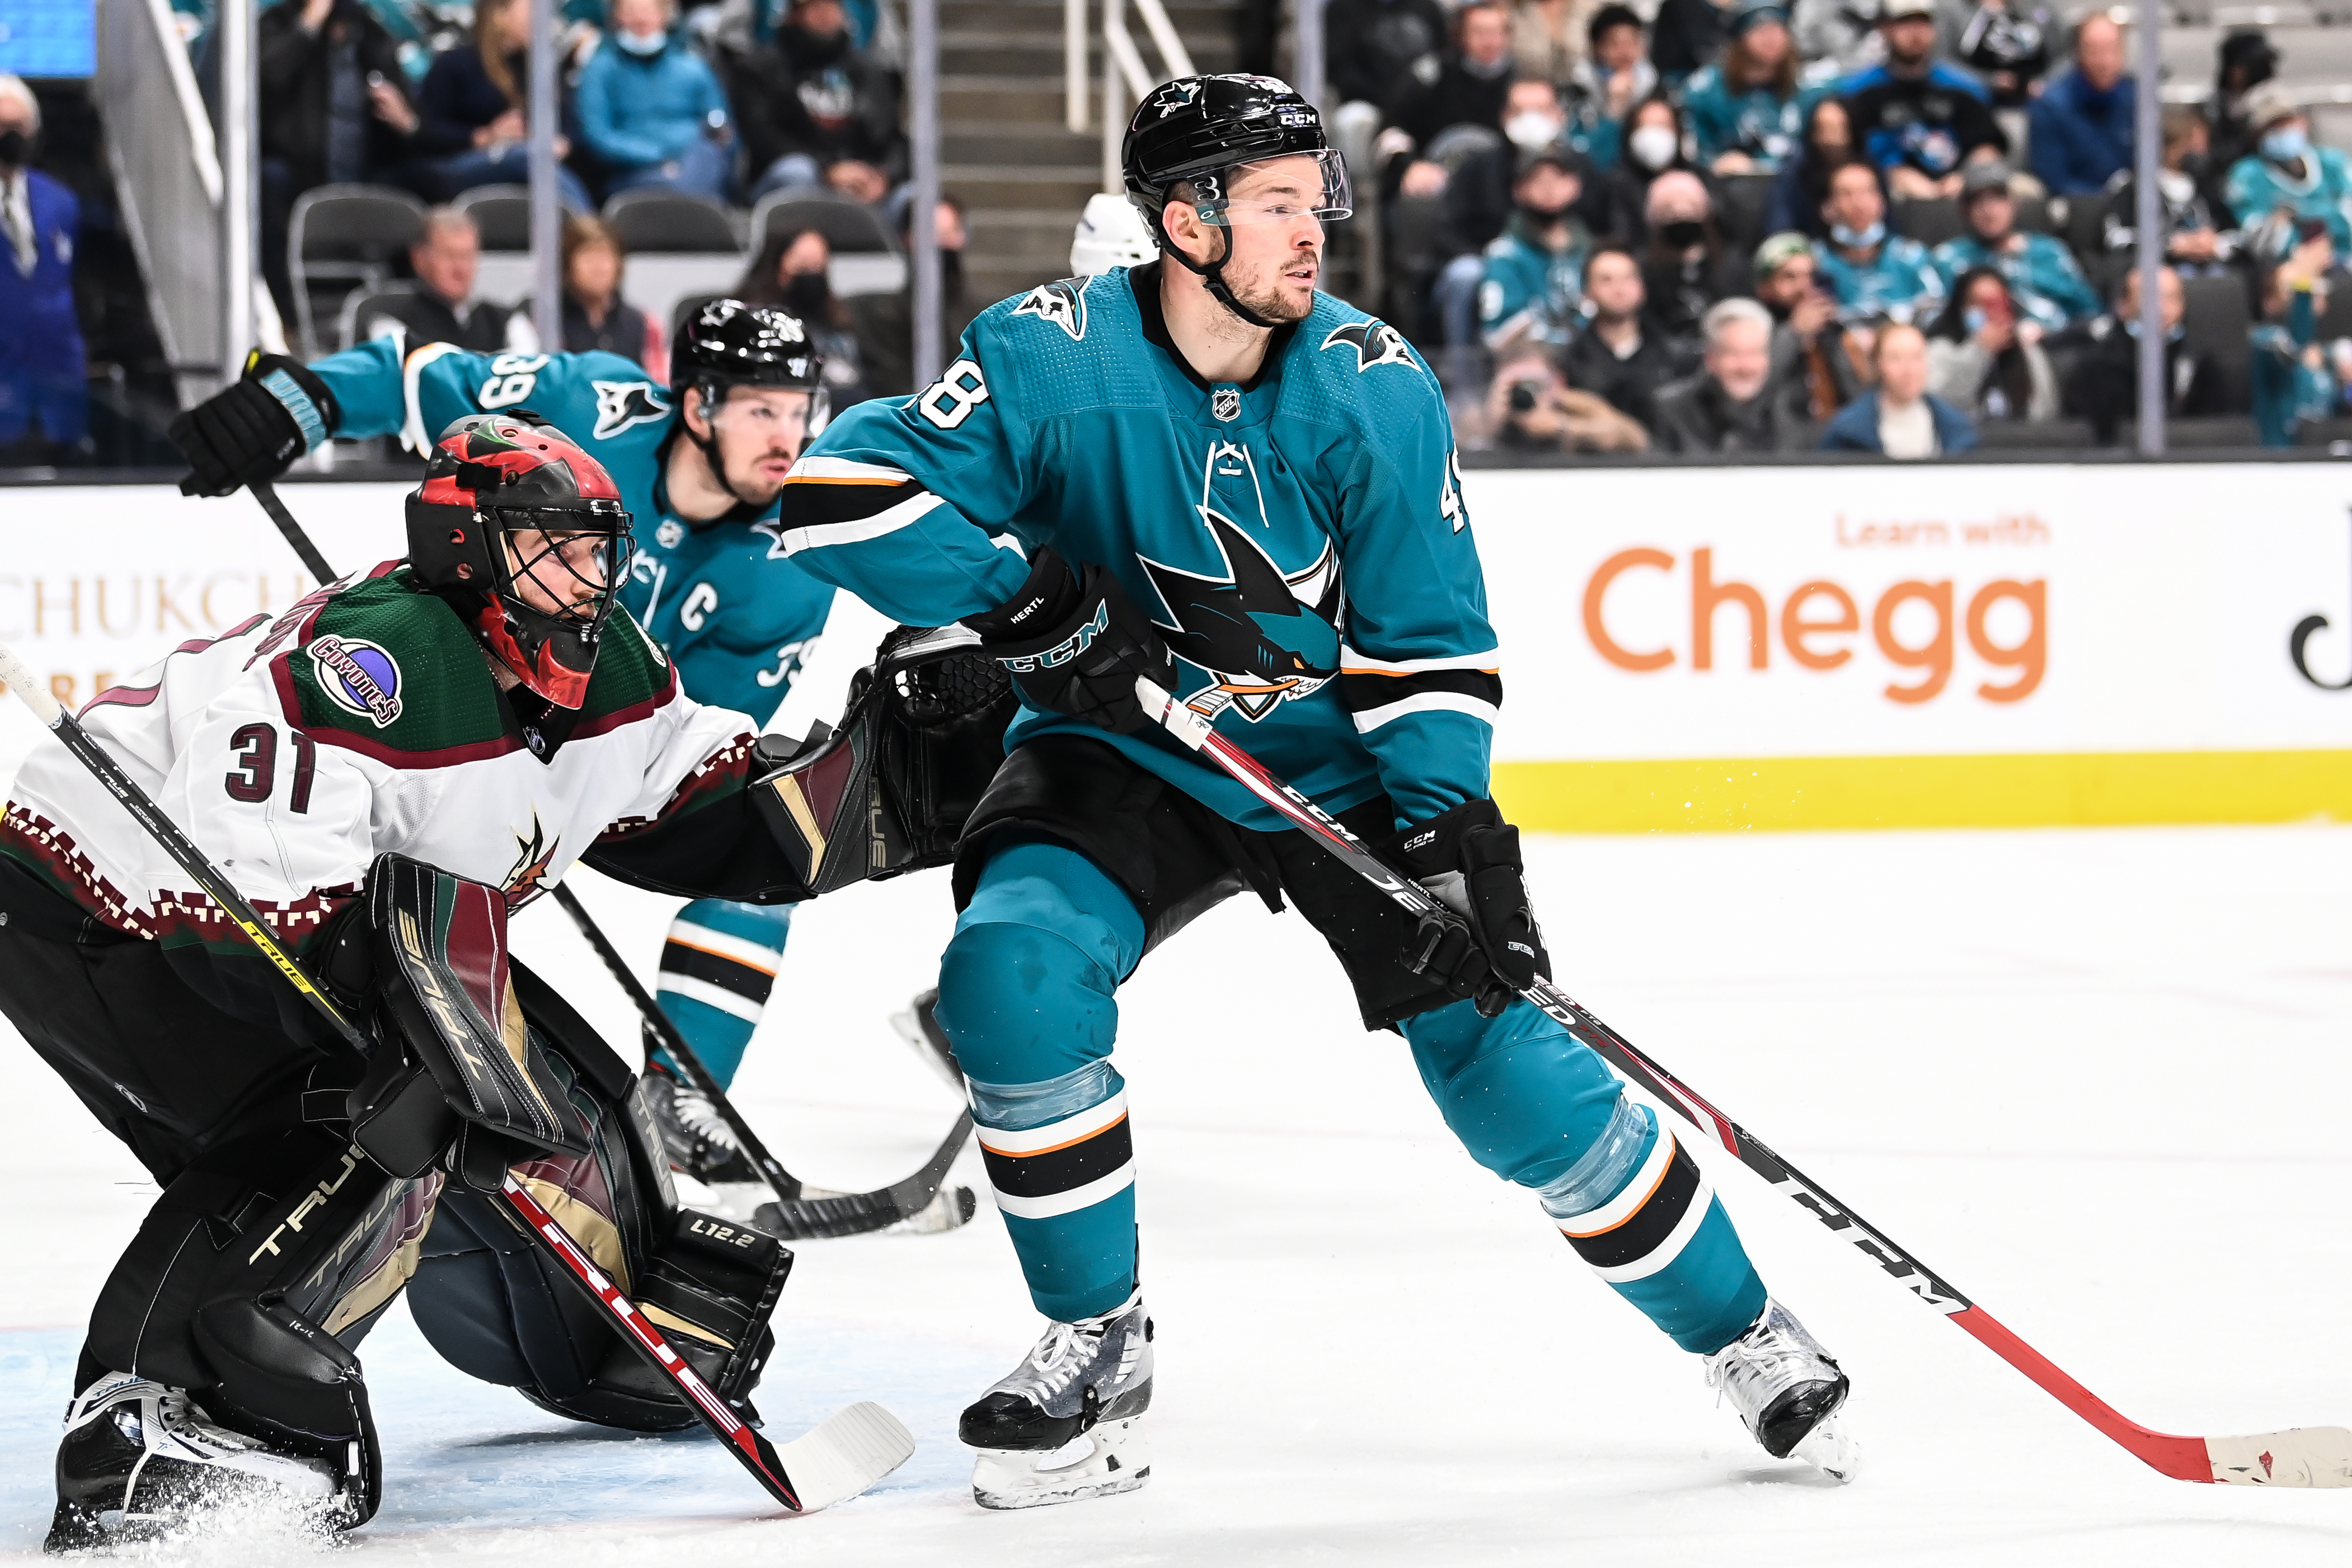 Tomas Hertl #48 of the San Jose Sharks battles in front of the net against Scott Wedgewood #31 of the Arizona Coyotes in a regular season game at SAP Center on December 28, 2021 in San Jose, California.